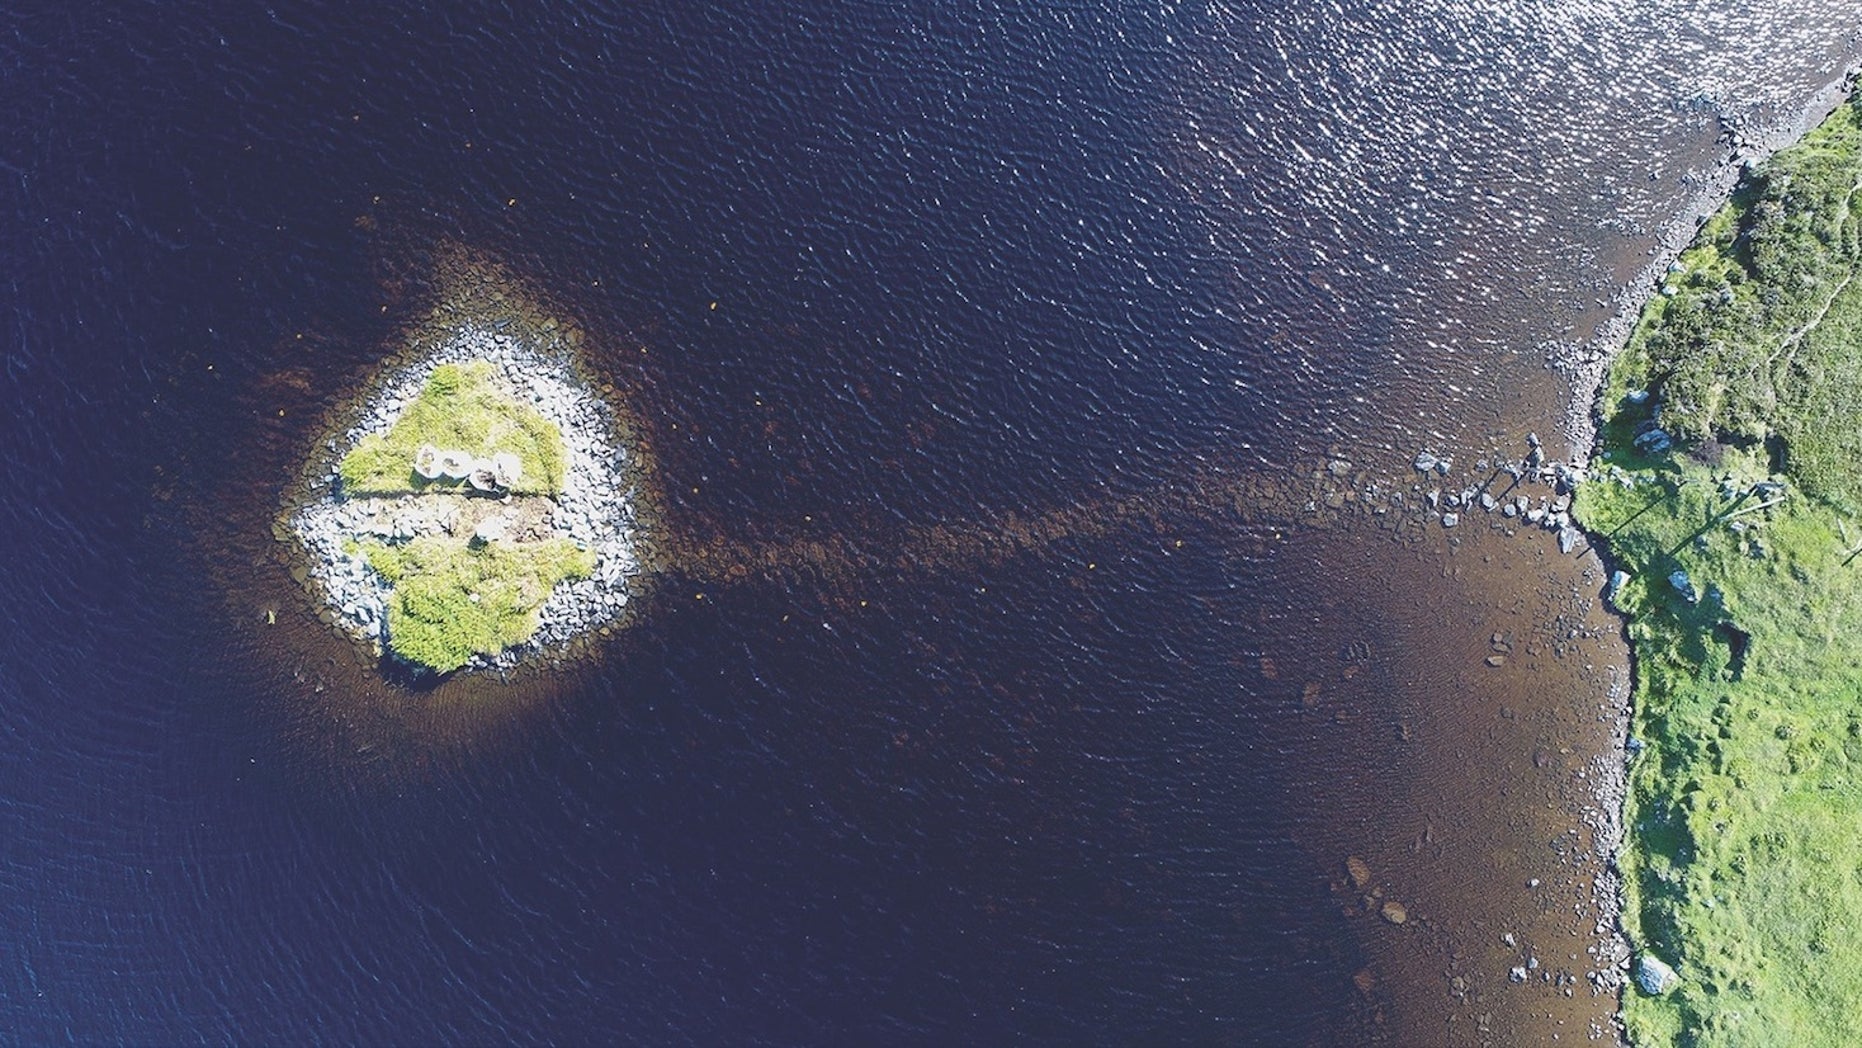 A bird's-eye view of Loch Bhorgastail, an islet that was clearly human-made with boulders.